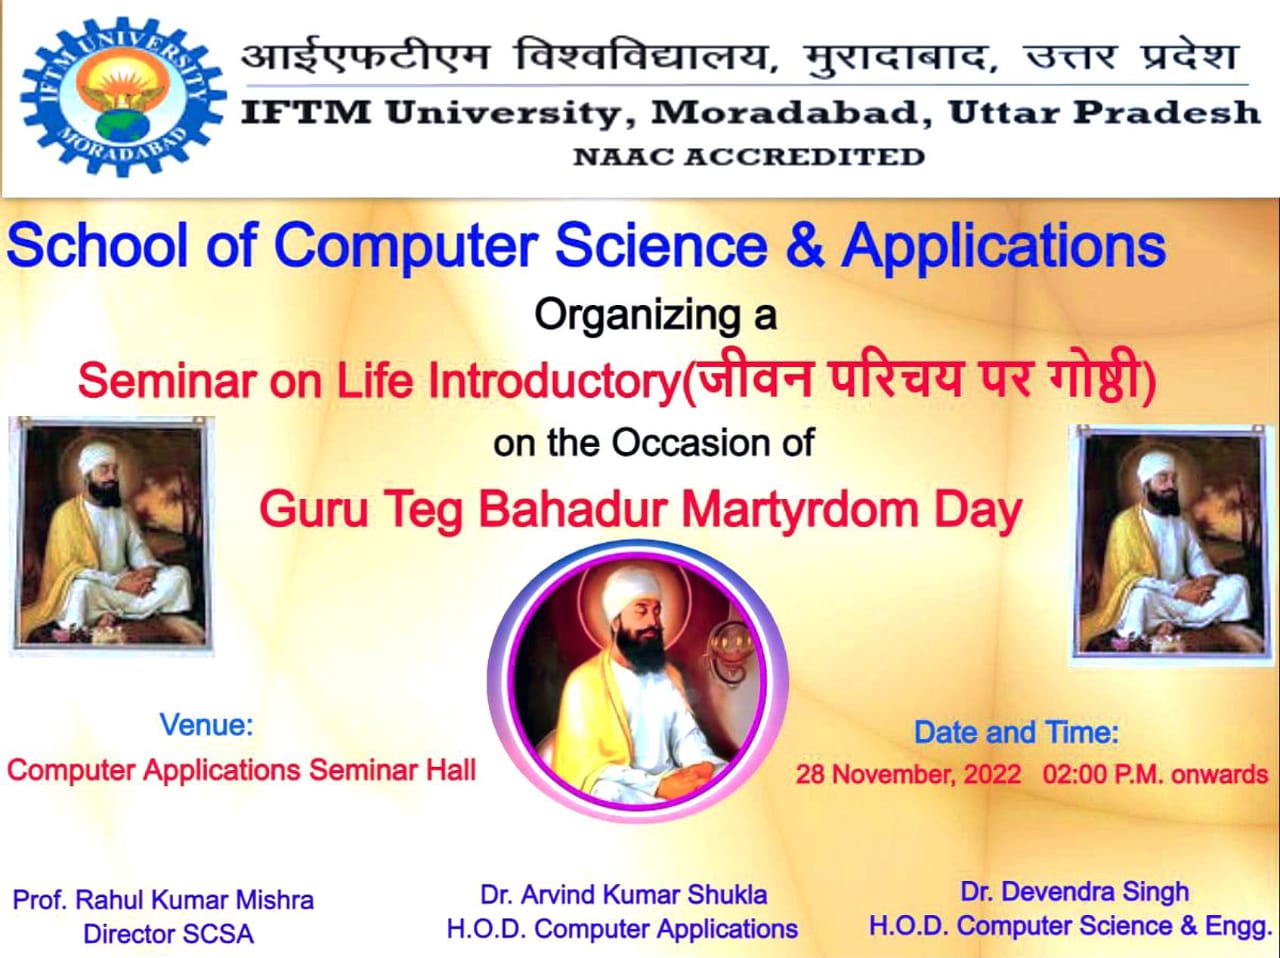 Seminar on Life Introductory